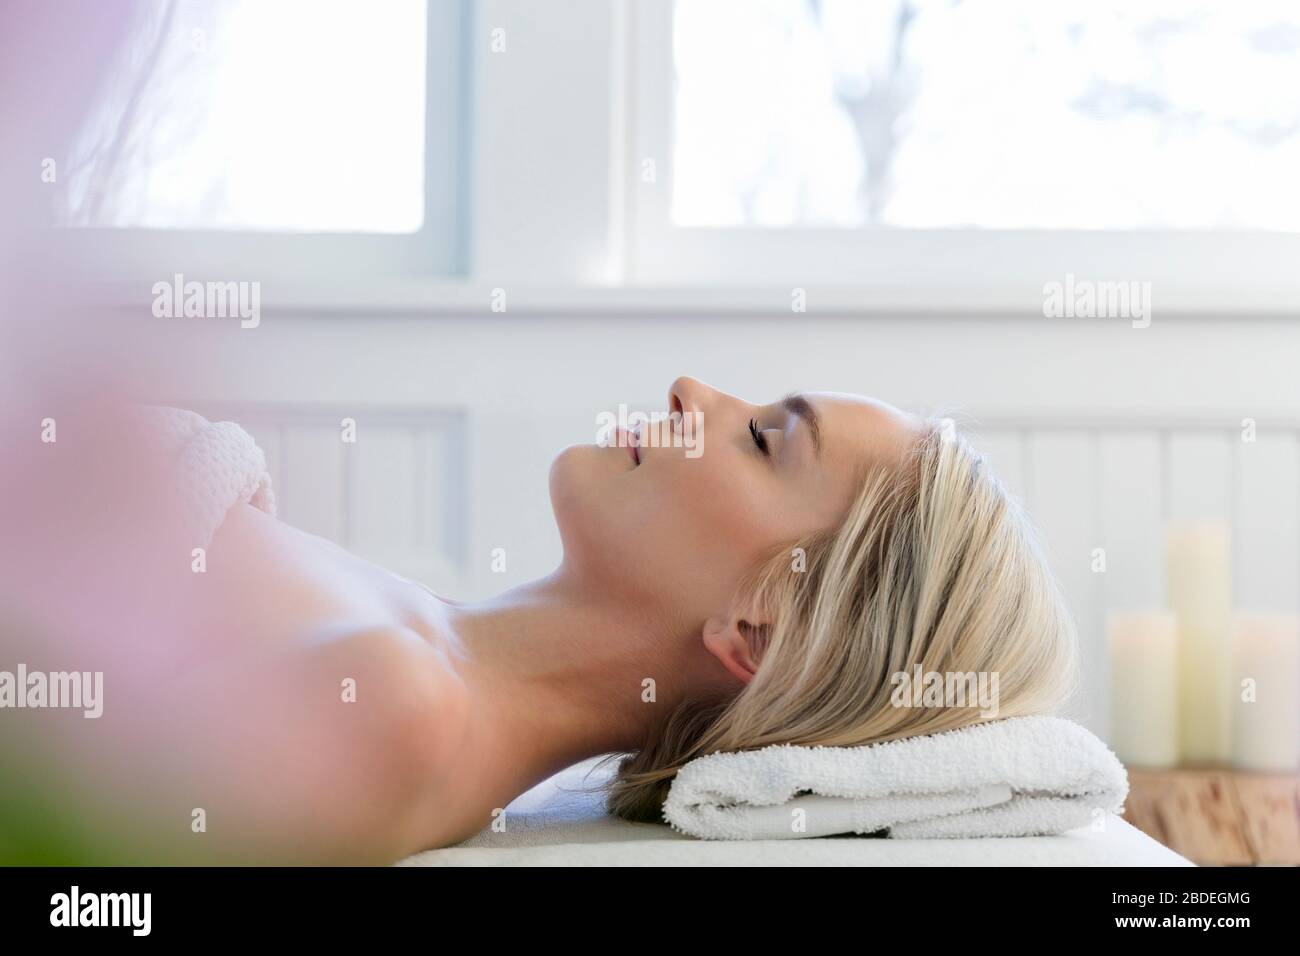 Woman lying on back on massage table with eyes closed Stock Photo